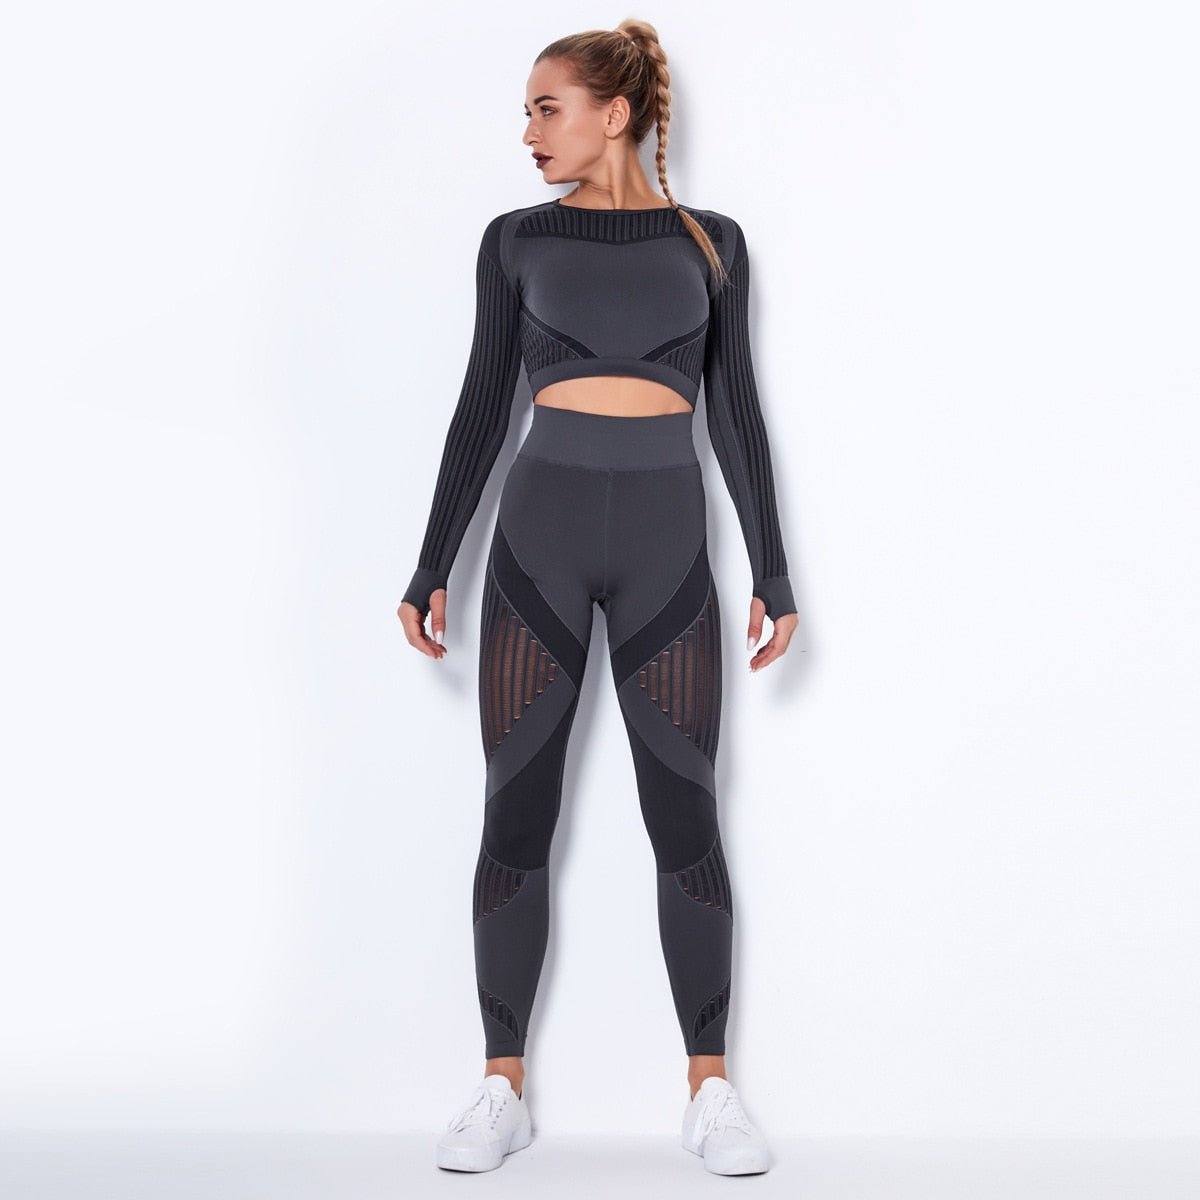 Women Seamless Yoga Suit Long Sleeve Crop Top Leggings Push Up Gym Outfit  Sets